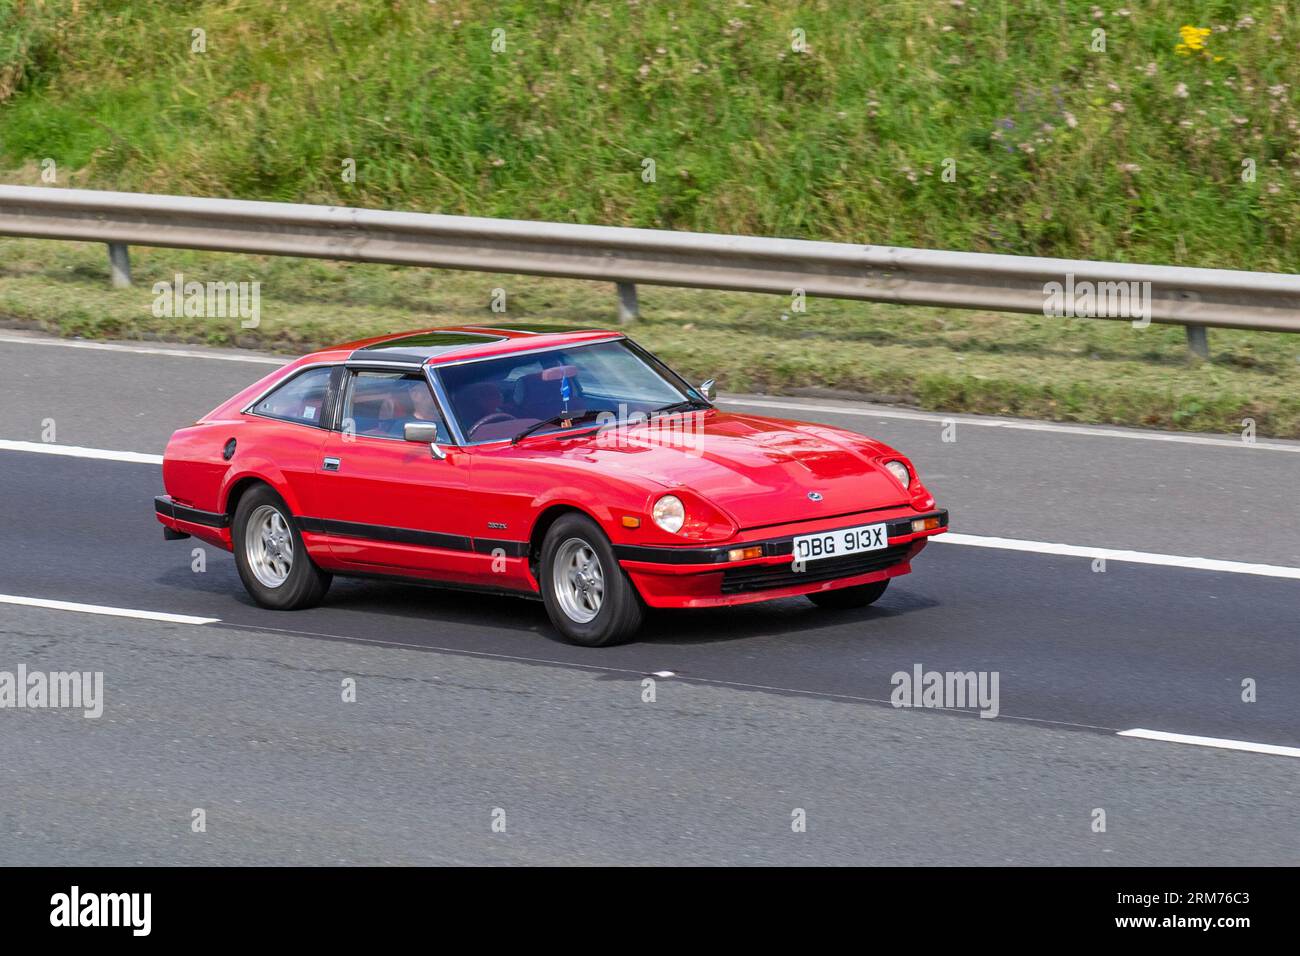 1982 80s eighties Red Datsun 280 Zx Targa Auto Petrol 2753 cc, Z-car coupe; travelling at speed on the M6 motorway in Greater Manchester, UK Stock Photo